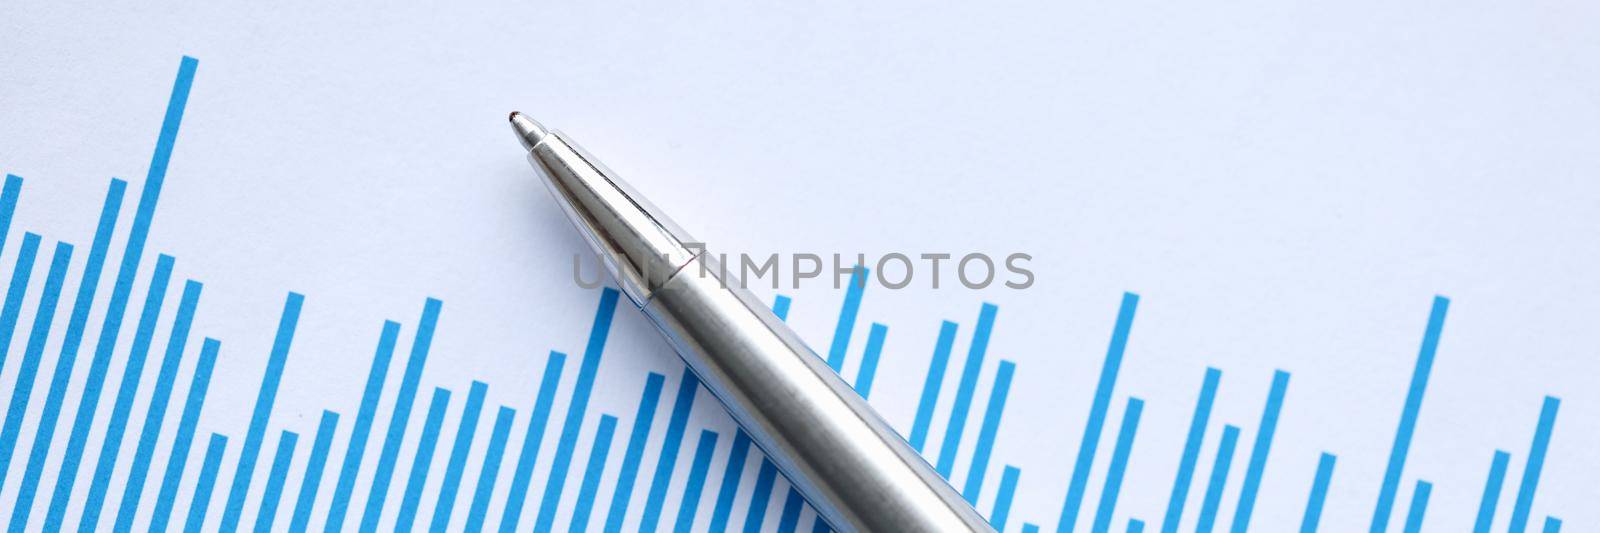 Ballpoint pen lying on document with graph closeup. Profit growth in business concept